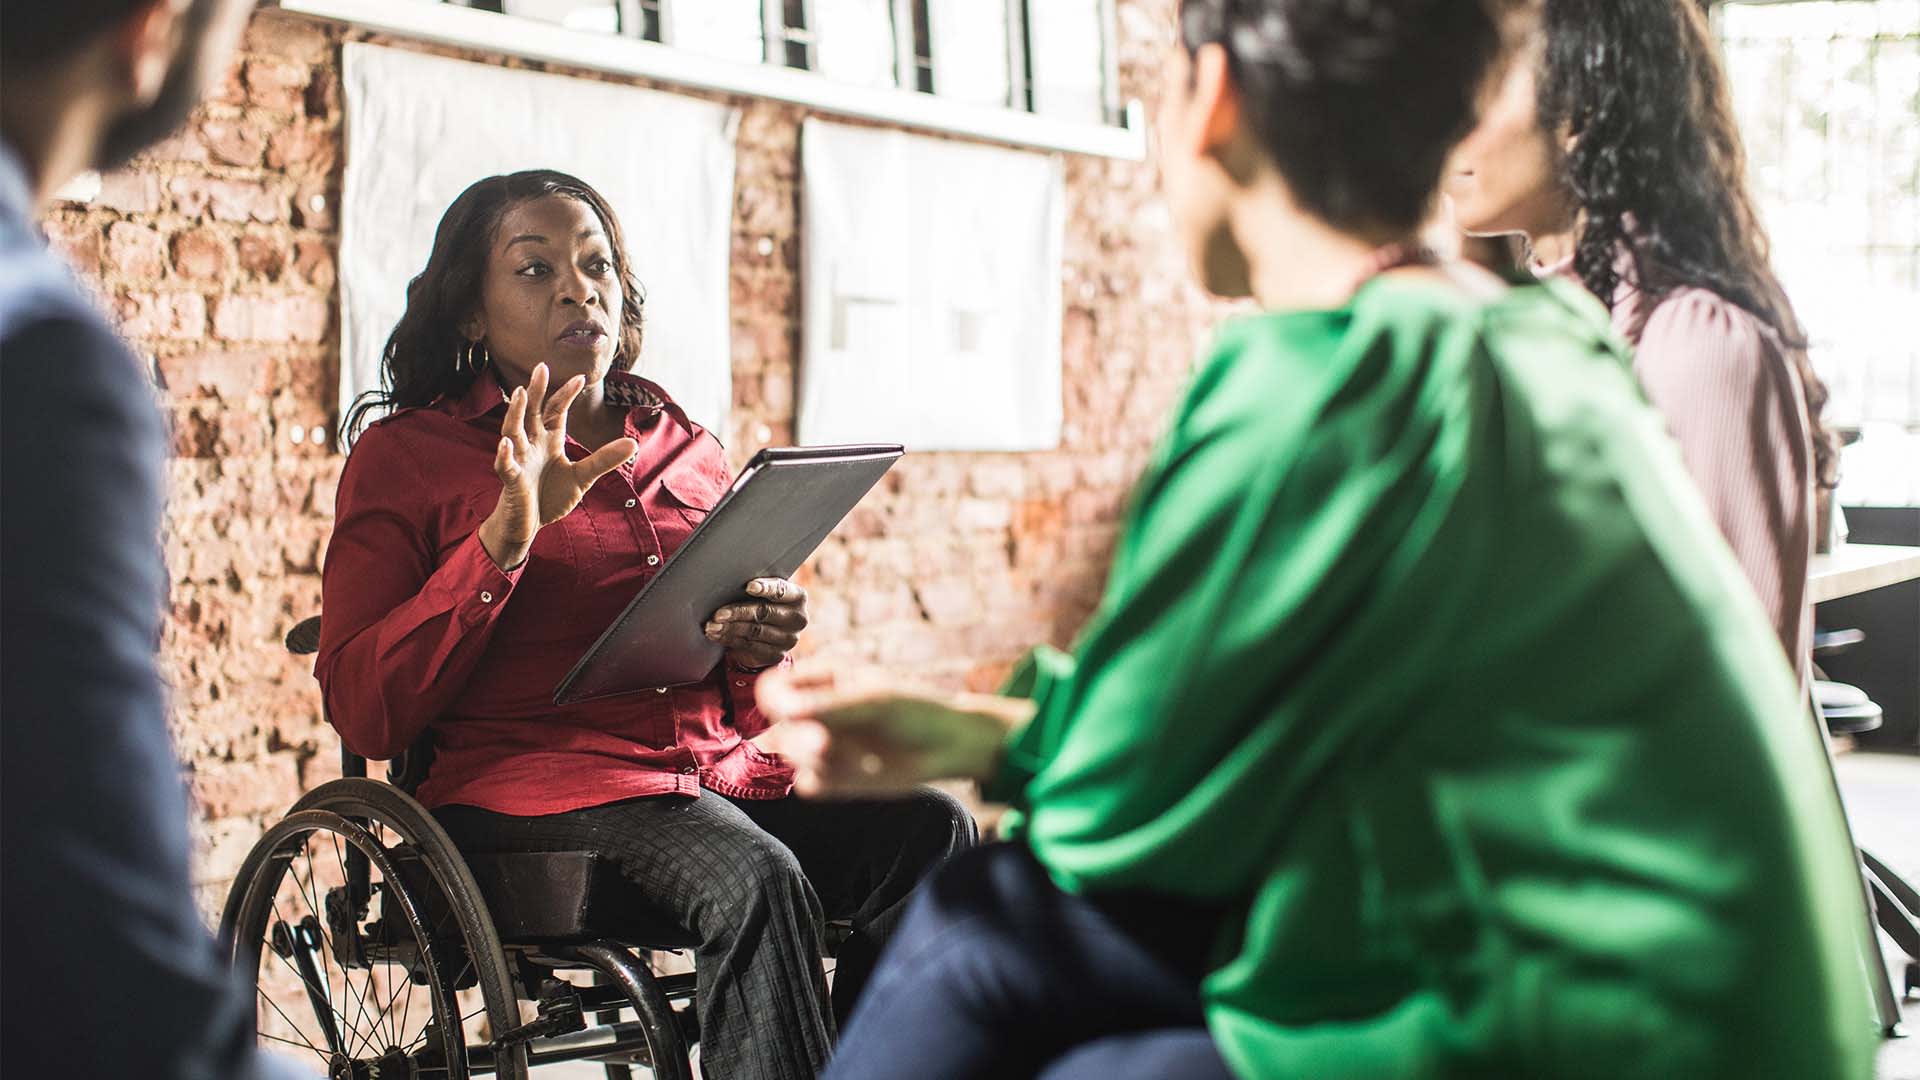 5 Ways to Make Your Workplace More Inclusive for What Is Now the Largest Minority Population